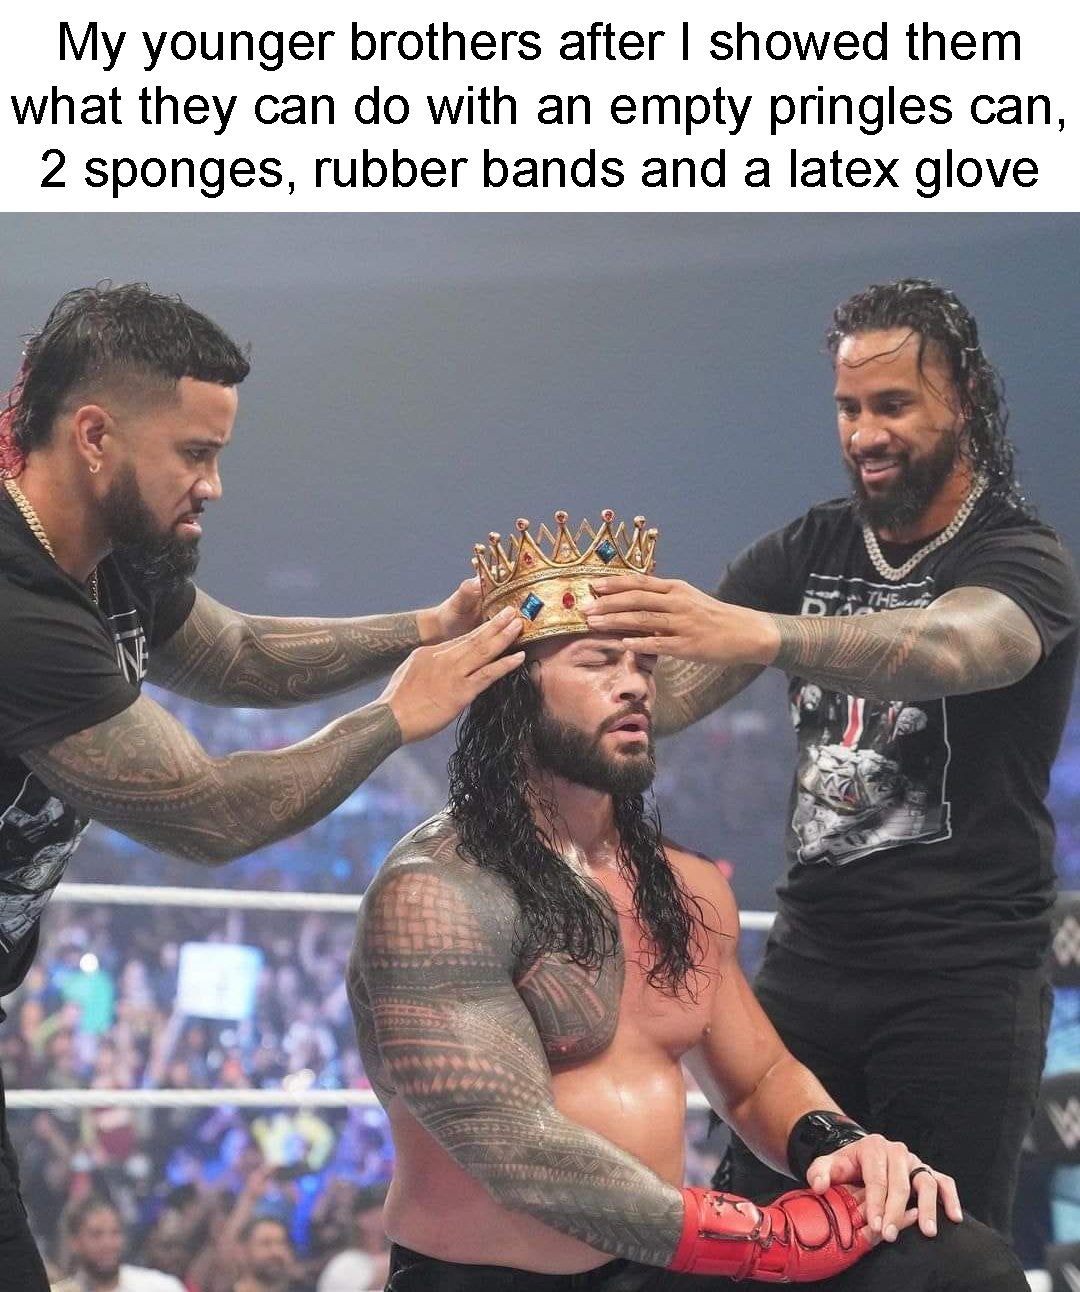 funny memes - WWE SmackDown - My younger brothers after I showed them what they can do with an empty pringles can, 2 sponges, rubber bands and a latex glove